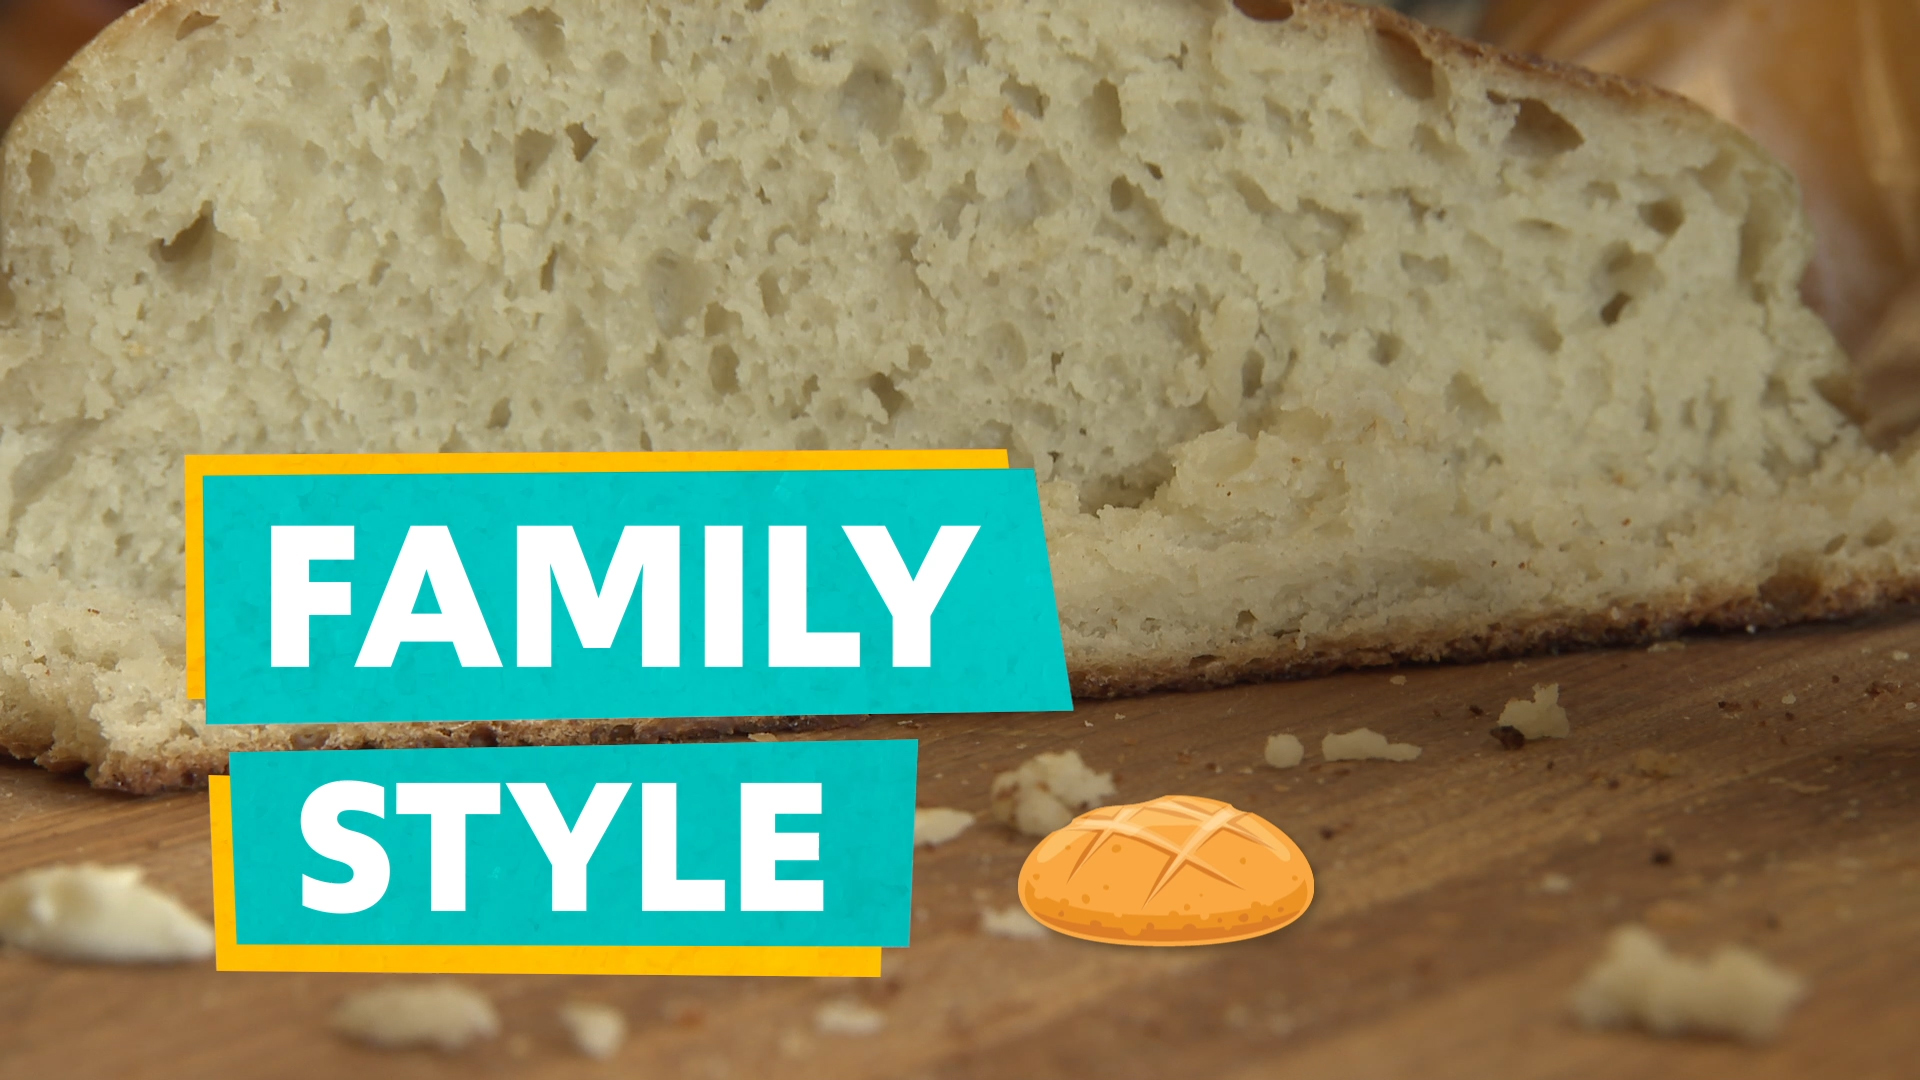 Family Style. Thumbnail image of homemade bread